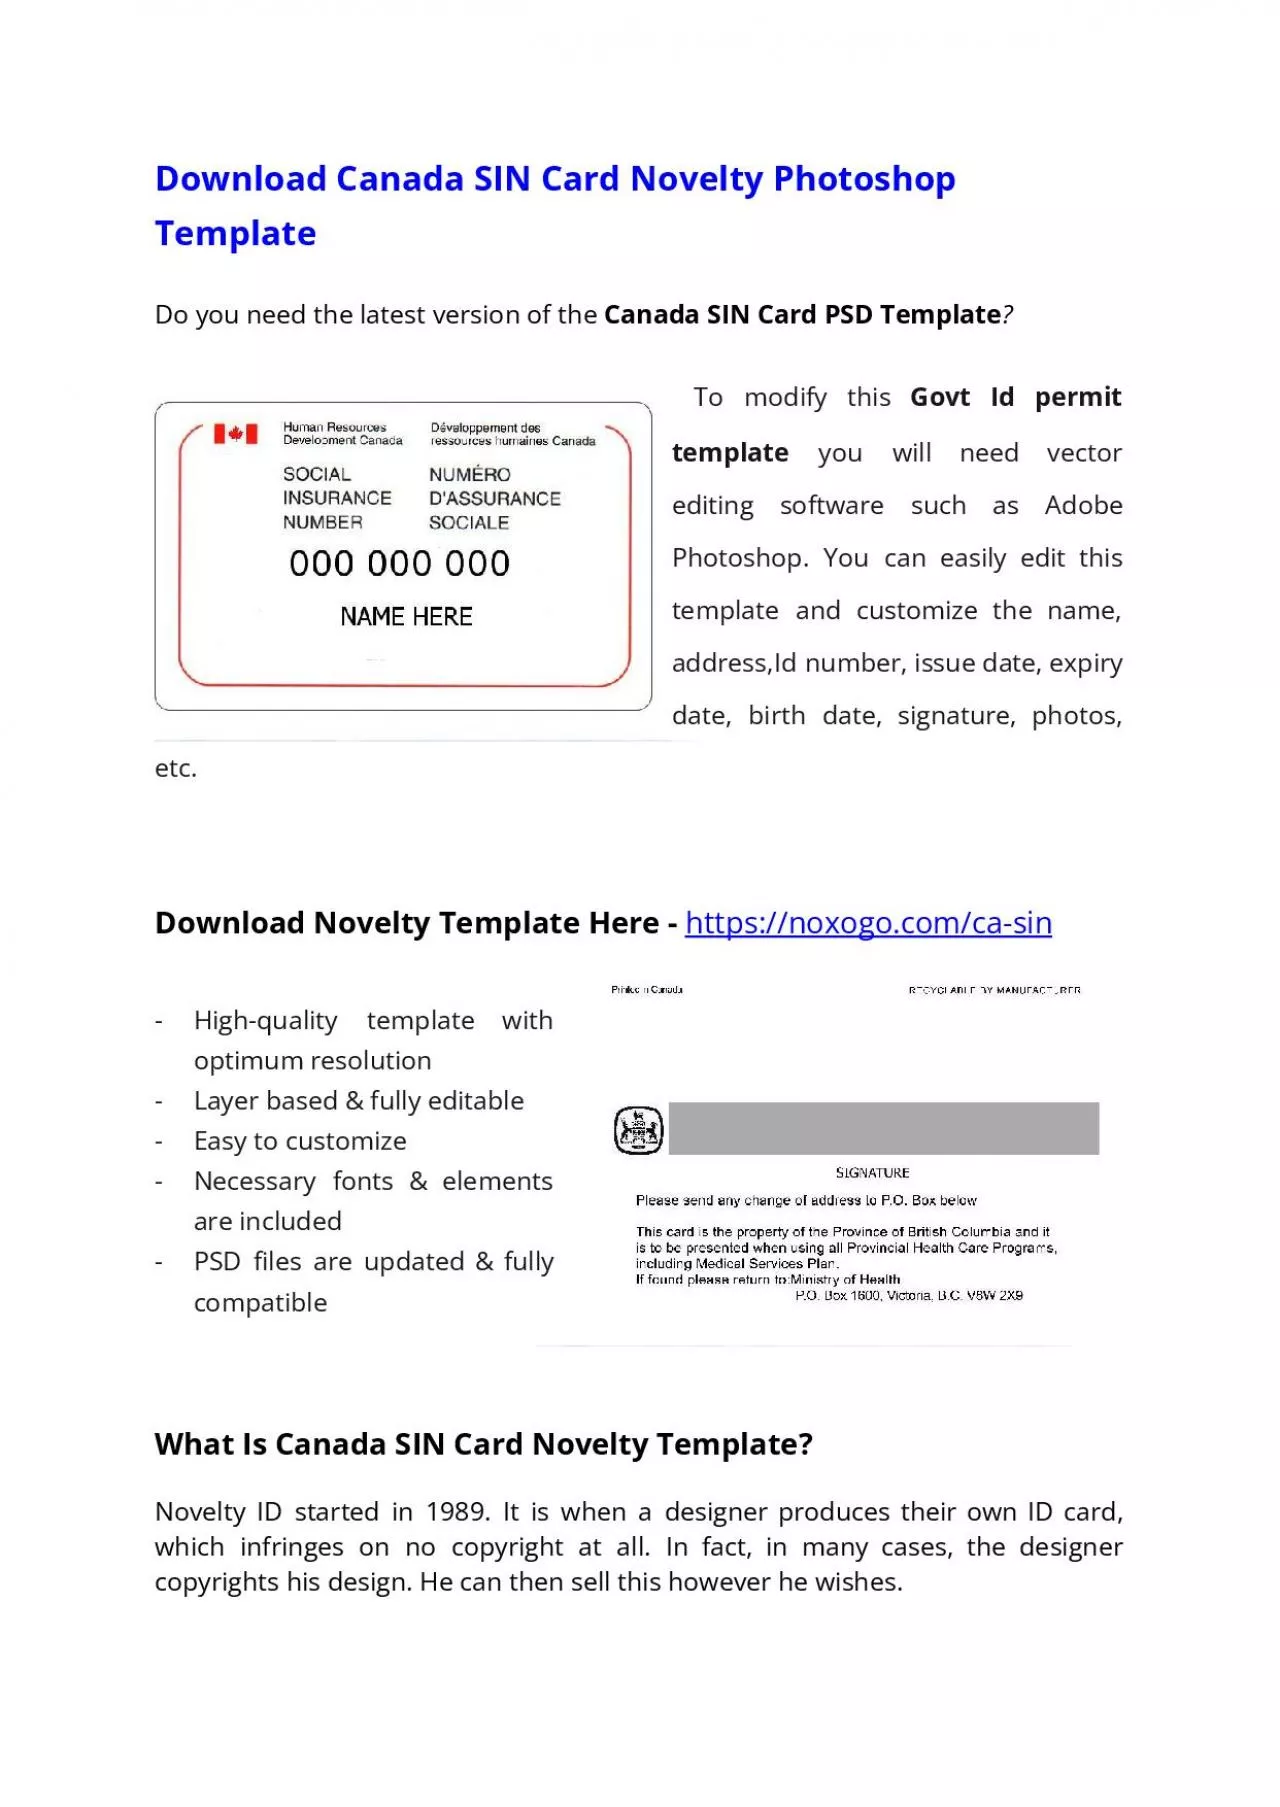 Canada SIN Card PSD Template – Download Photoshop File